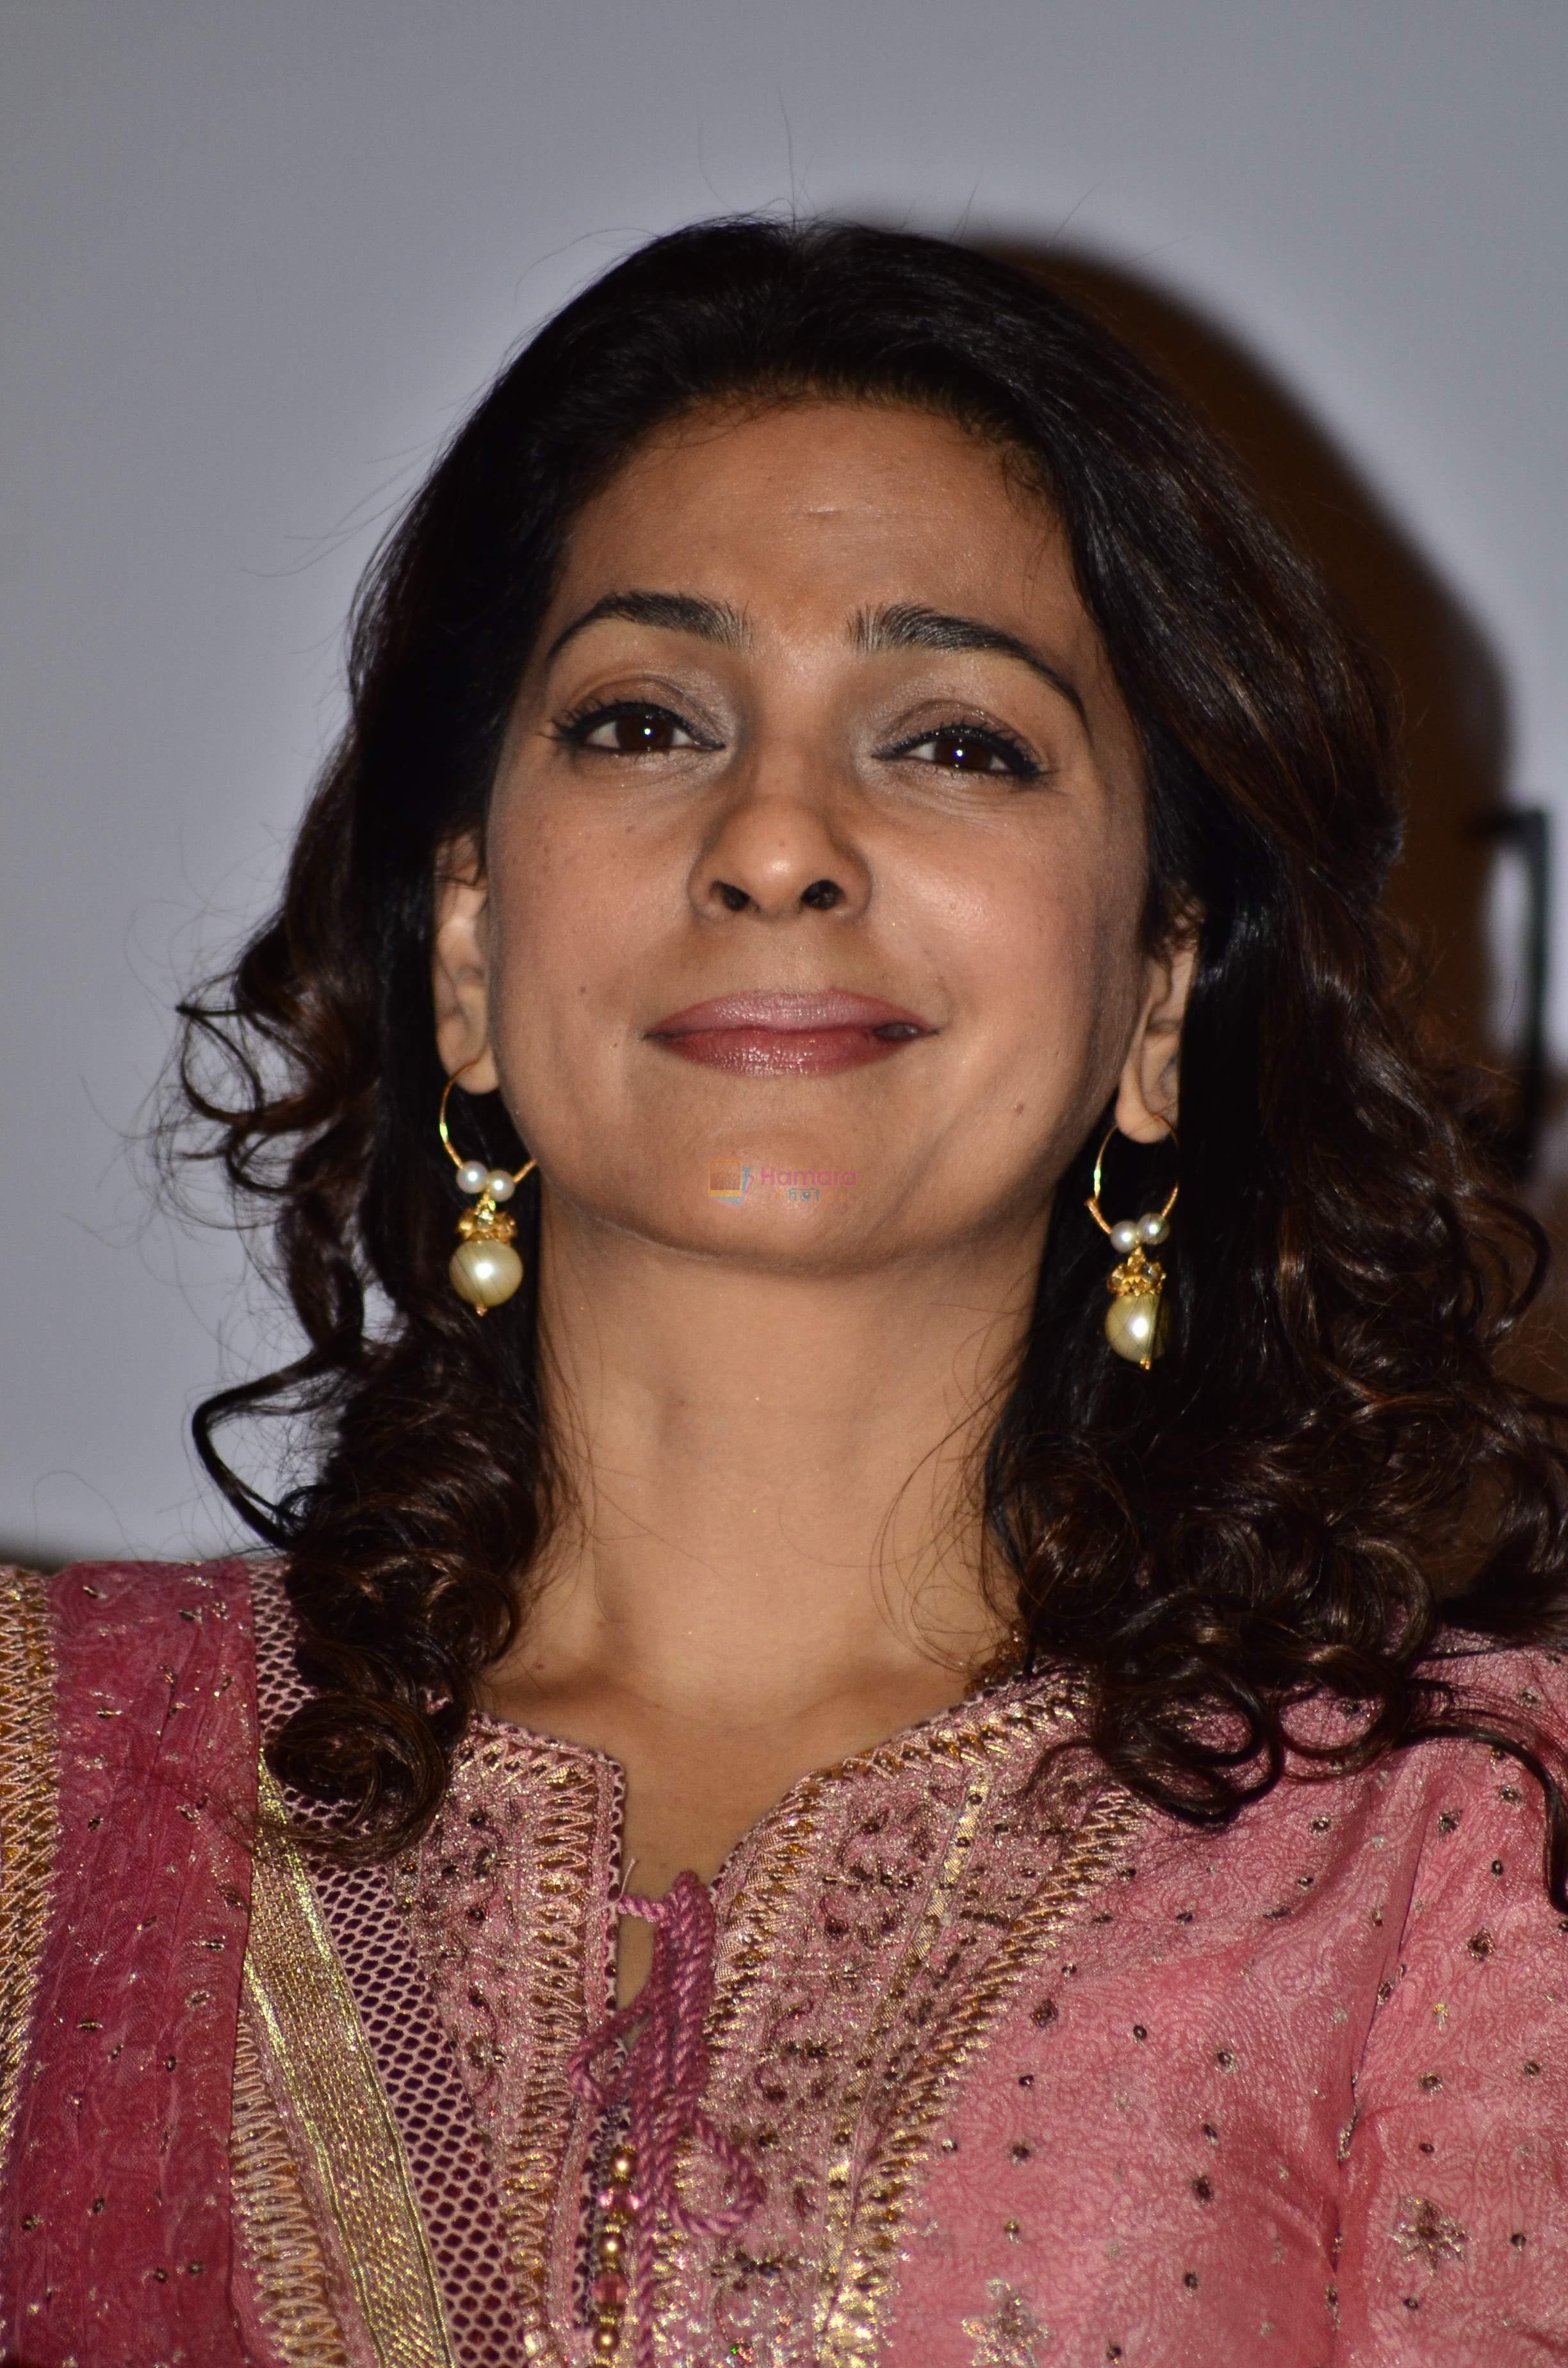 Juhi Chawla at the launch of India's first online portal on Child Sexual Abuse called www.aarambhindia.org on 18th Nov 2014